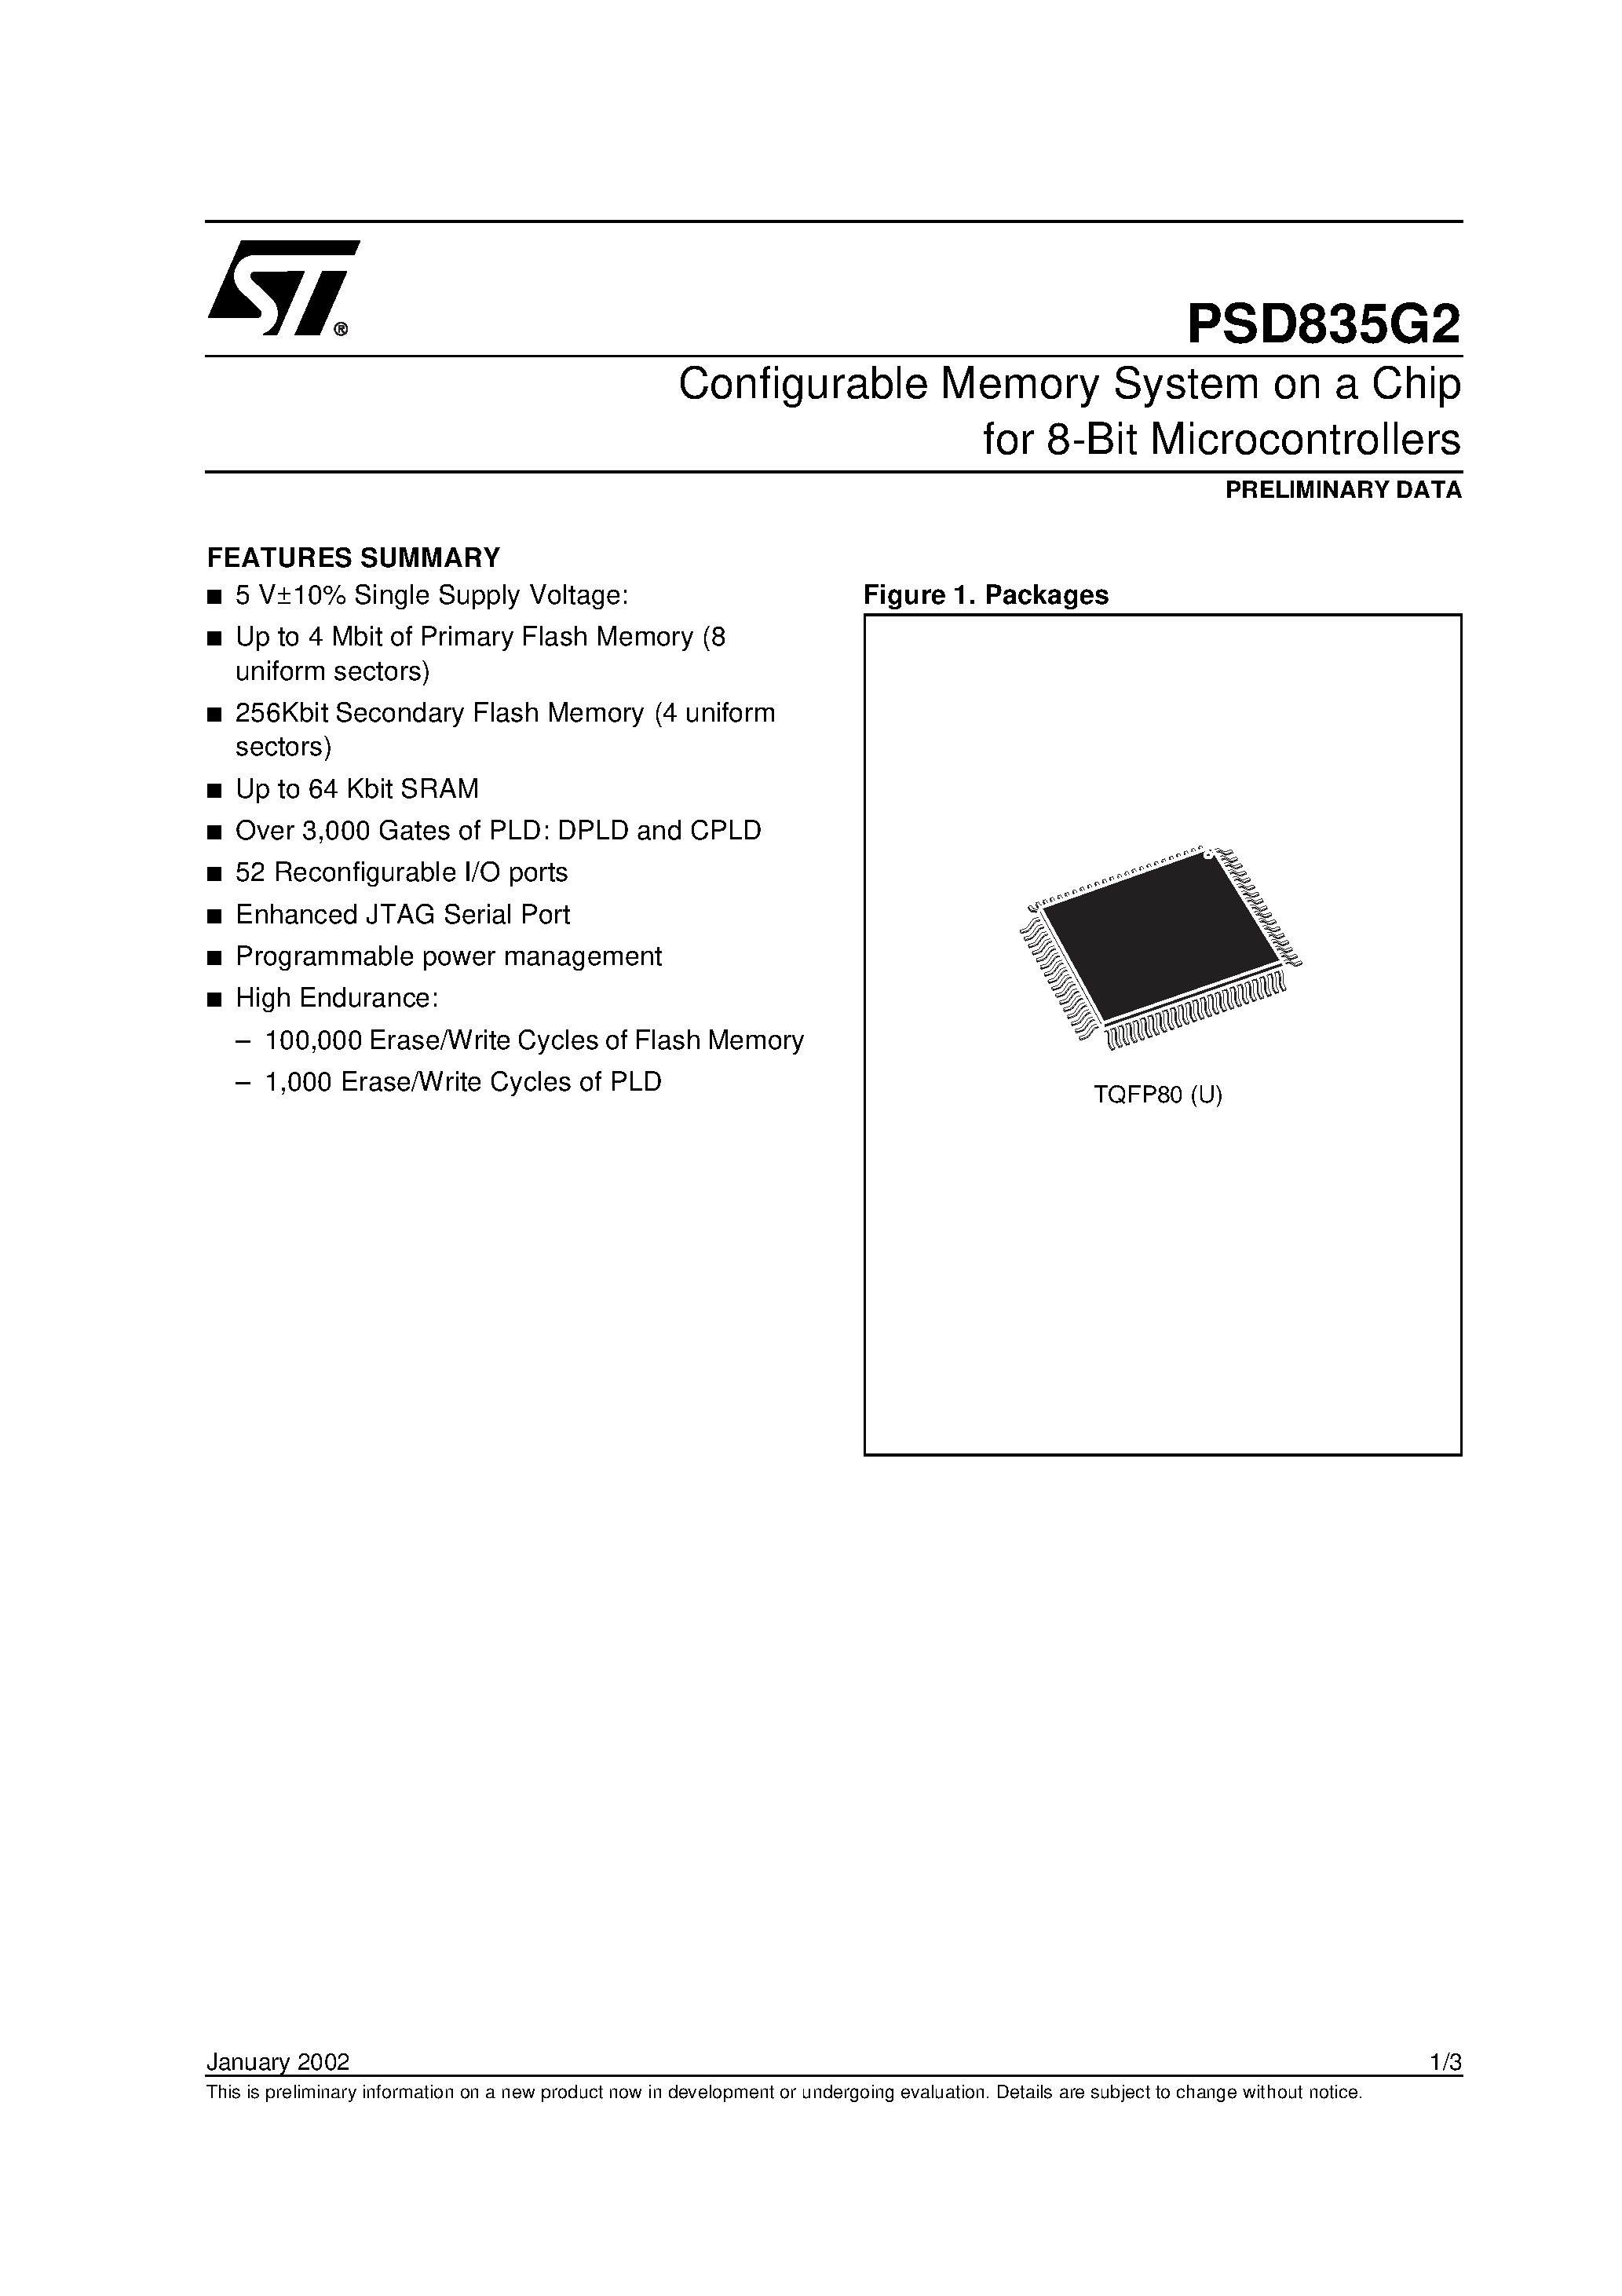 Datasheet PSD835F2-A-90JI - Configurable Memory System on a Chip for 8-Bit Microcontrollers page 1